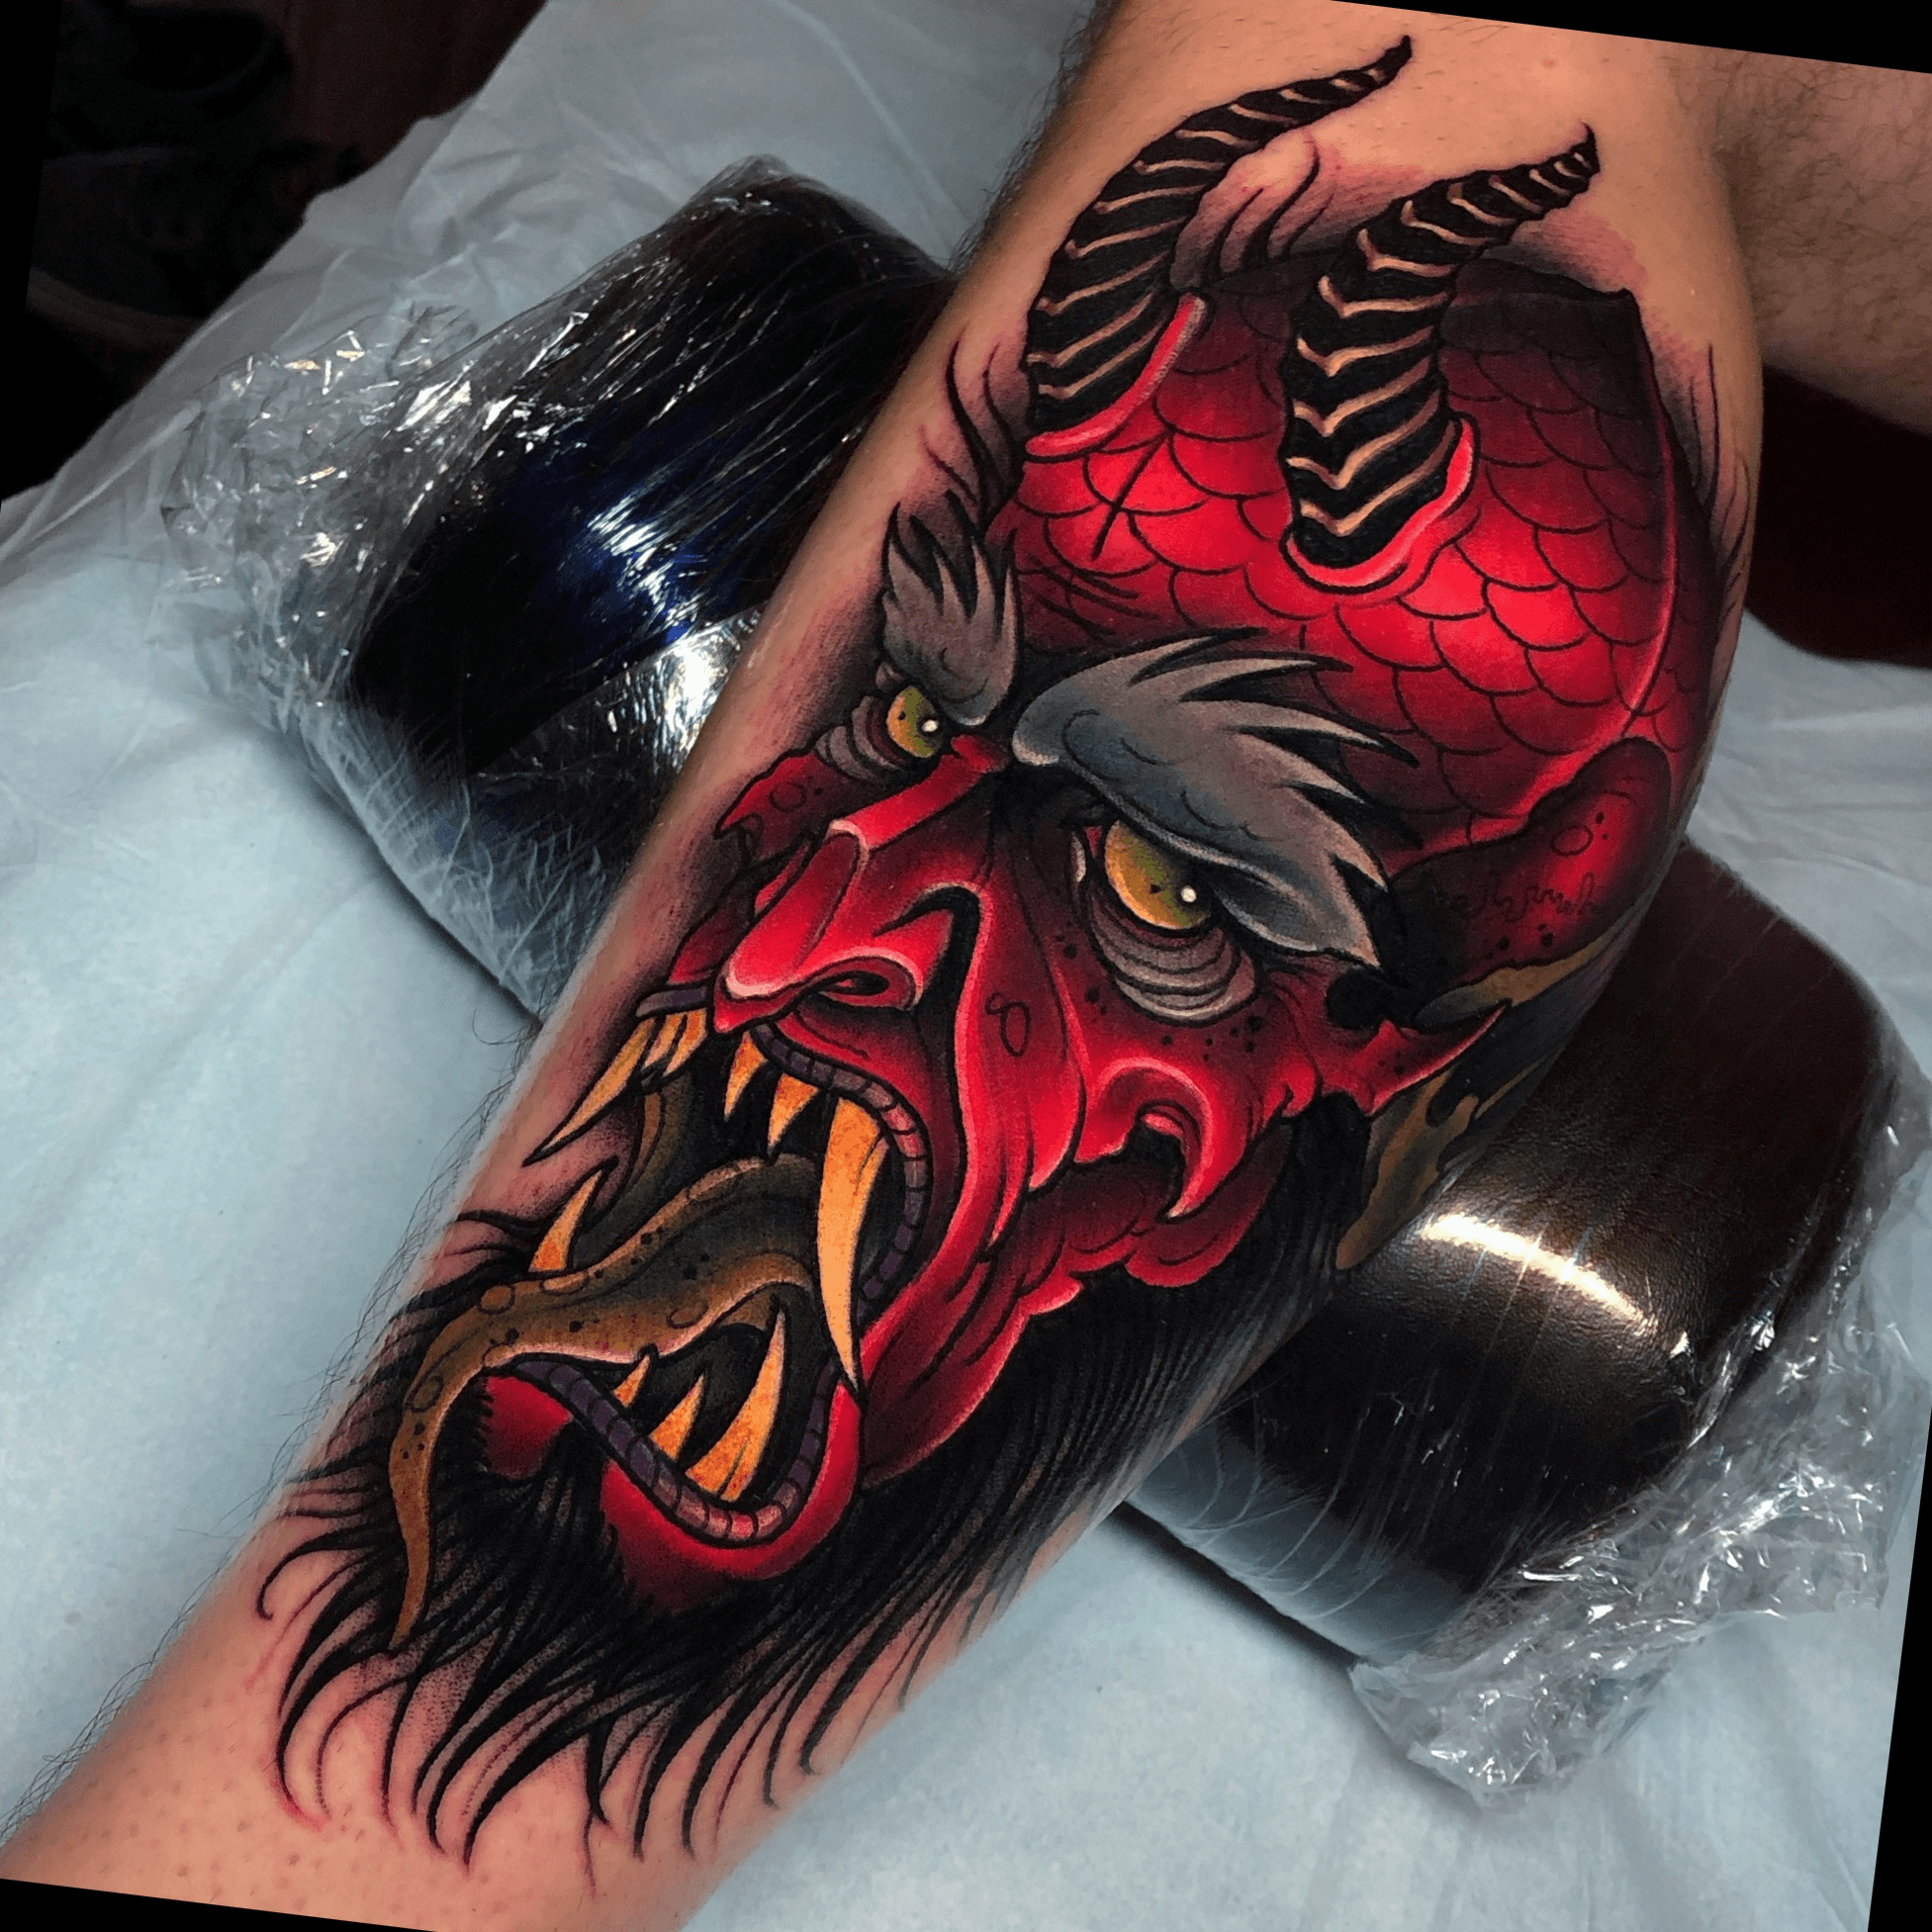 Demon holding hourglass tattoo by Ick Abrams of GRIM Tattoo in Penndel PA   rtattoos